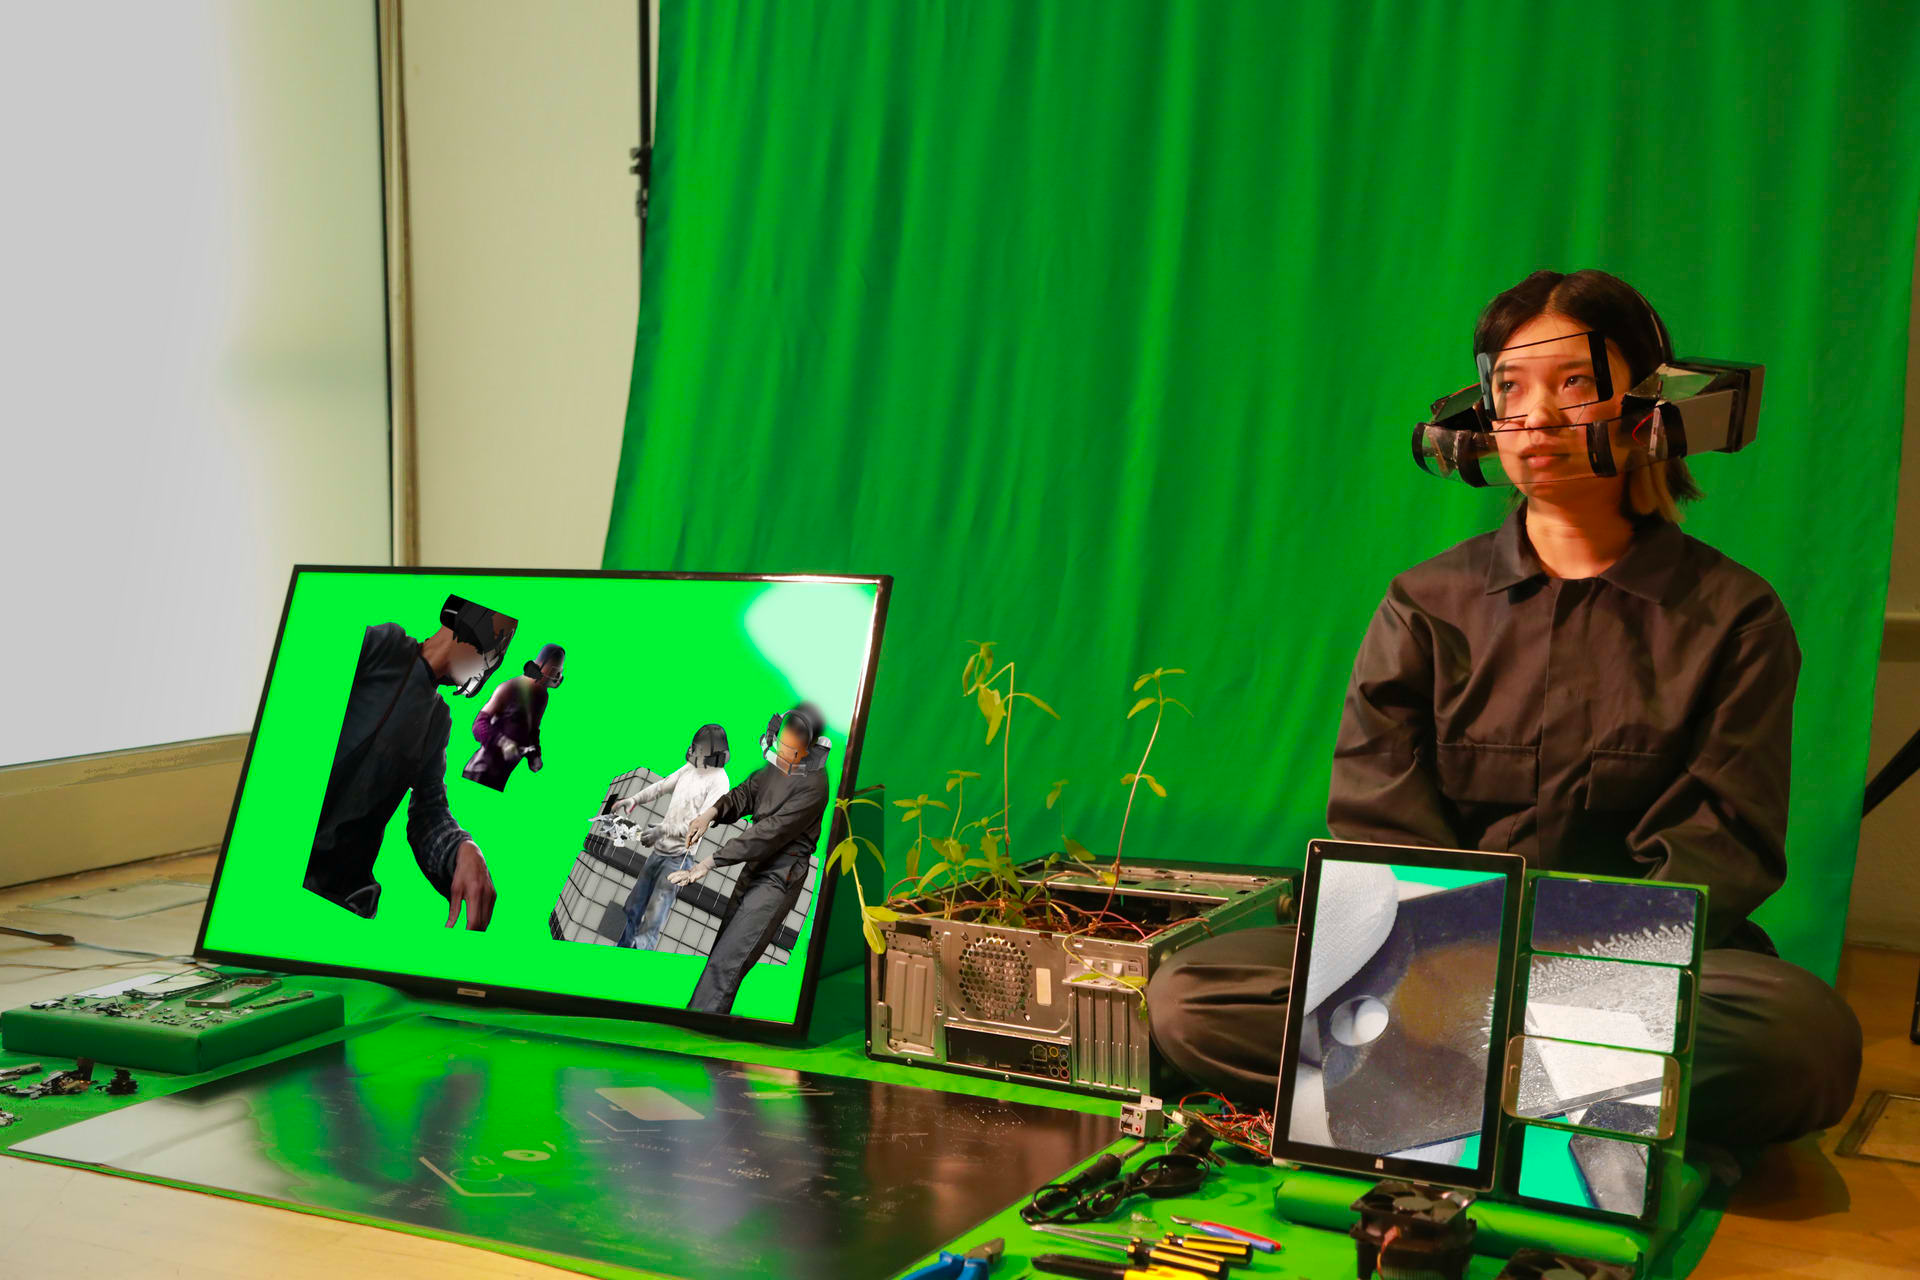 Photograph of a woman sat on the floor in front of a green curtain, next to an arranged collection of tools and objects with screens, wearing a contraption on her head which includes a clear screen over her eyes.